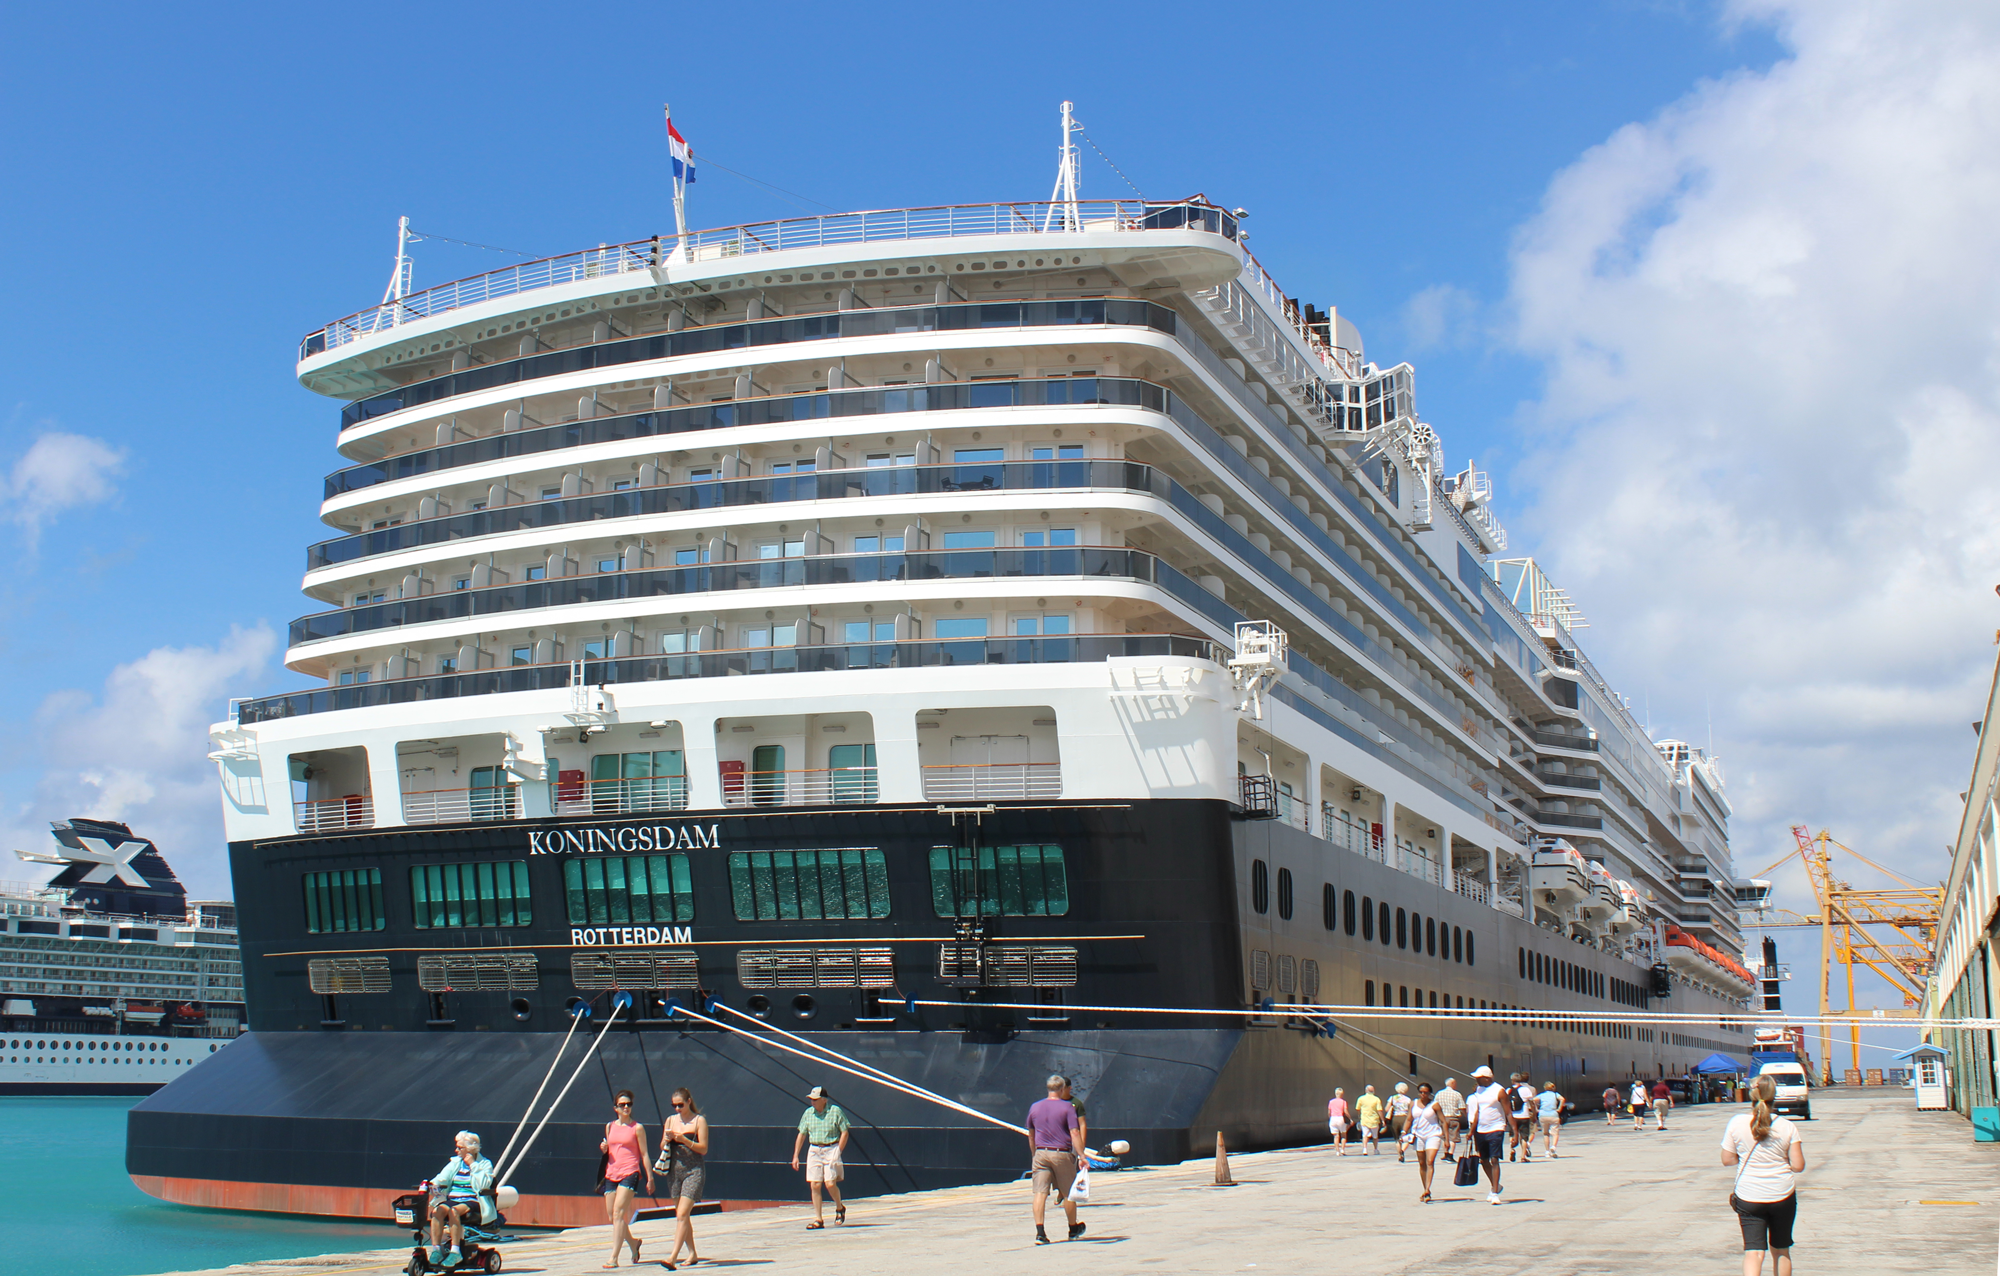 MS Koningsdam in its first ever visit to Barbados, 2016